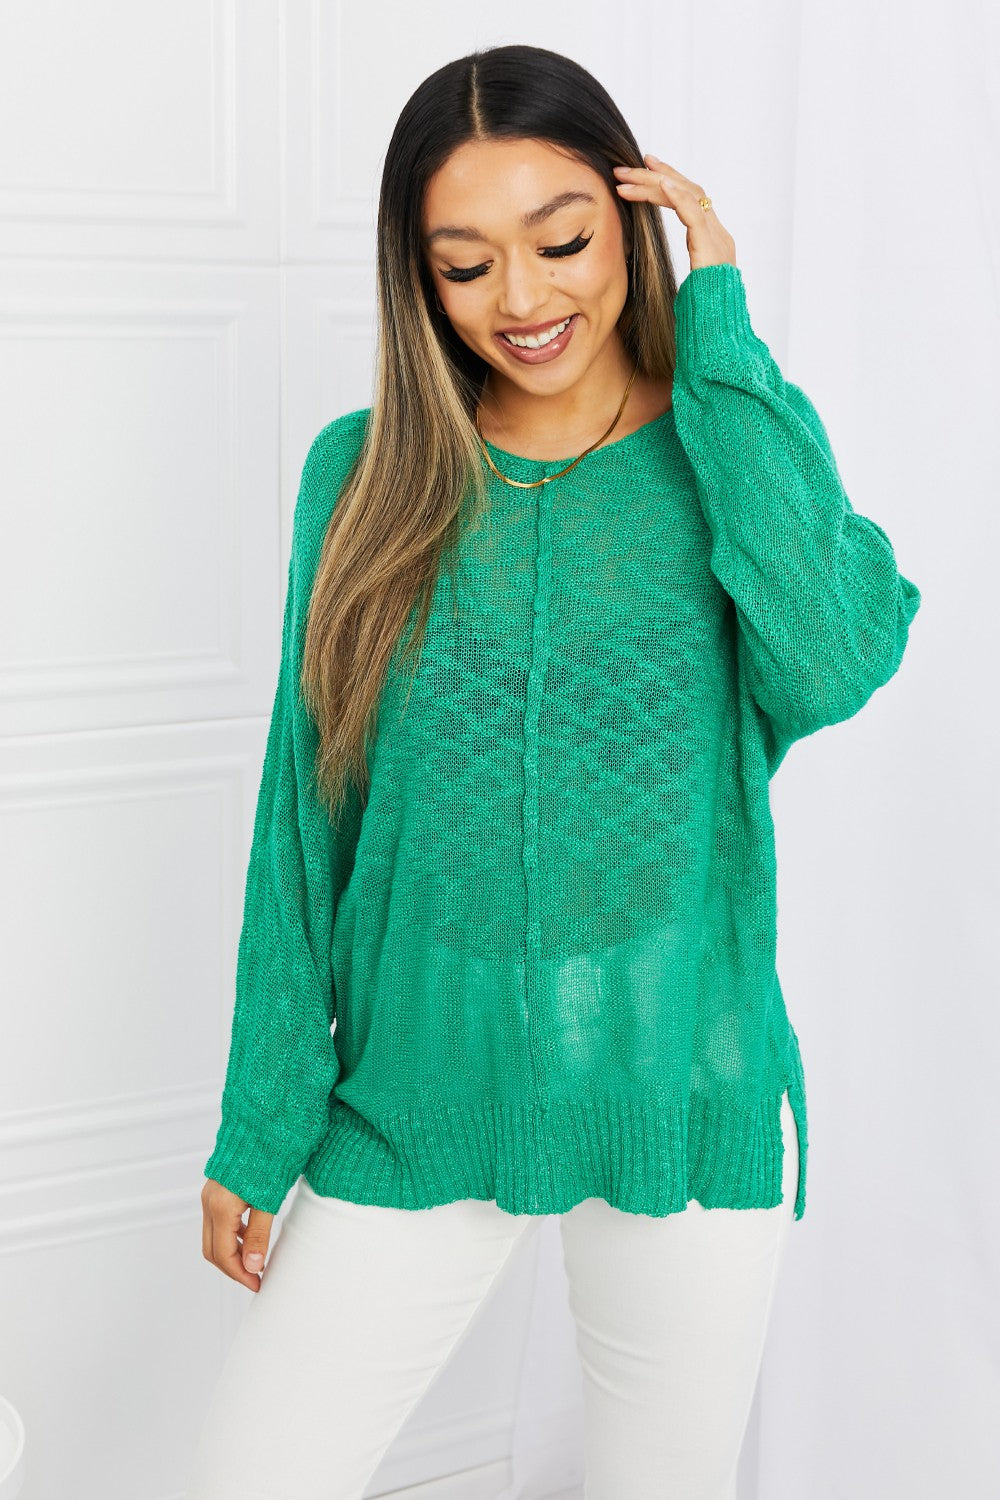 KELLY GREEN - Mittoshop Exposed Seam Slit Knit Top in Kelly Green - Ships from The US - womens shirt at TFC&H Co.